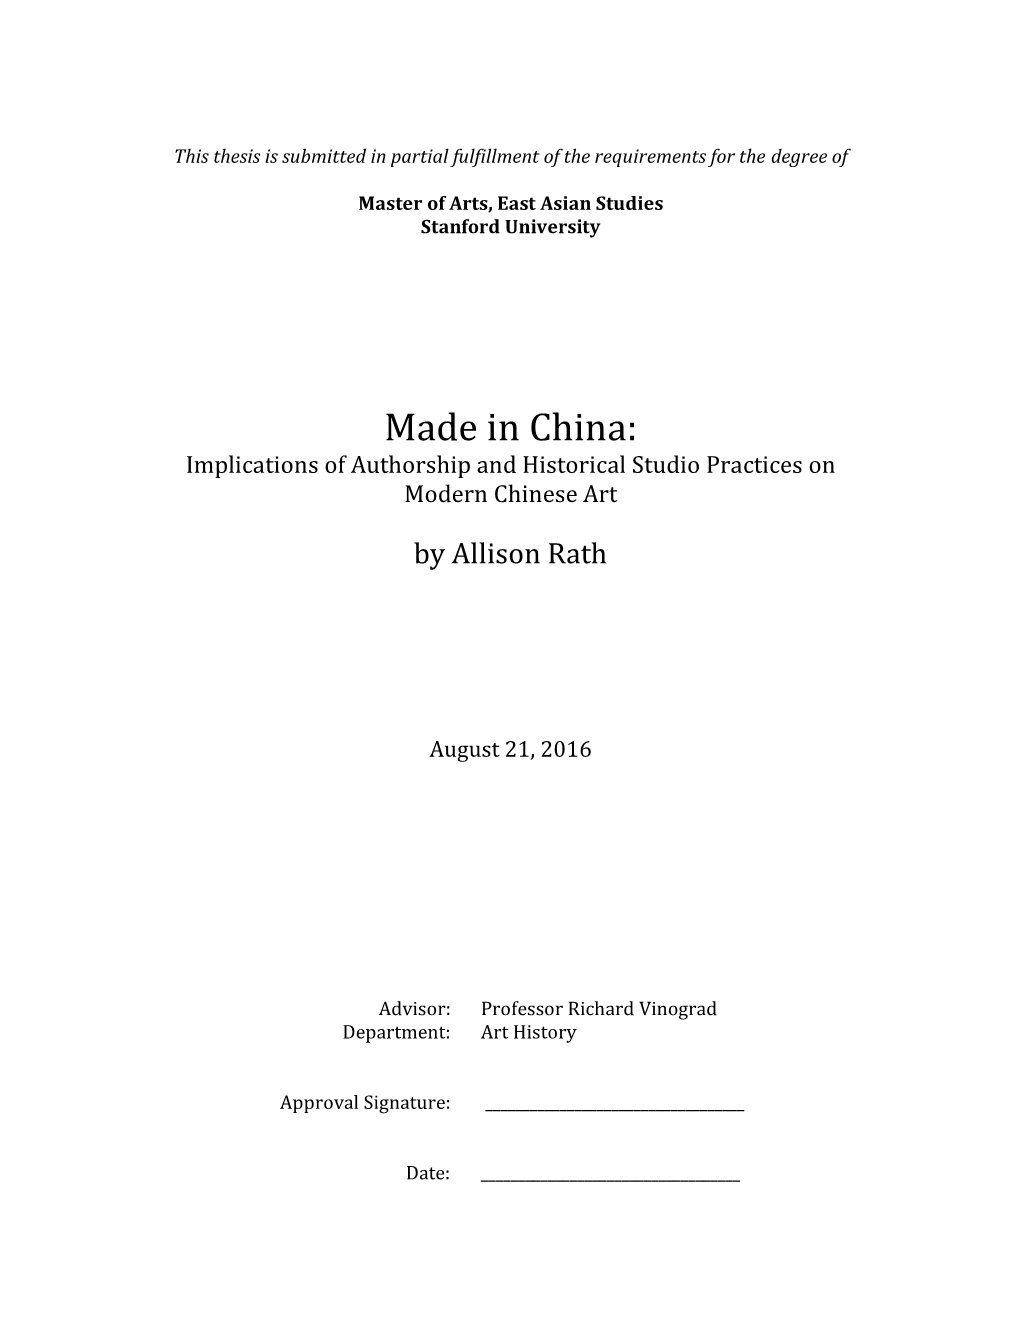 Made in China: Implications of Authorship and Historical Studio Practices on Modern Chinese Art